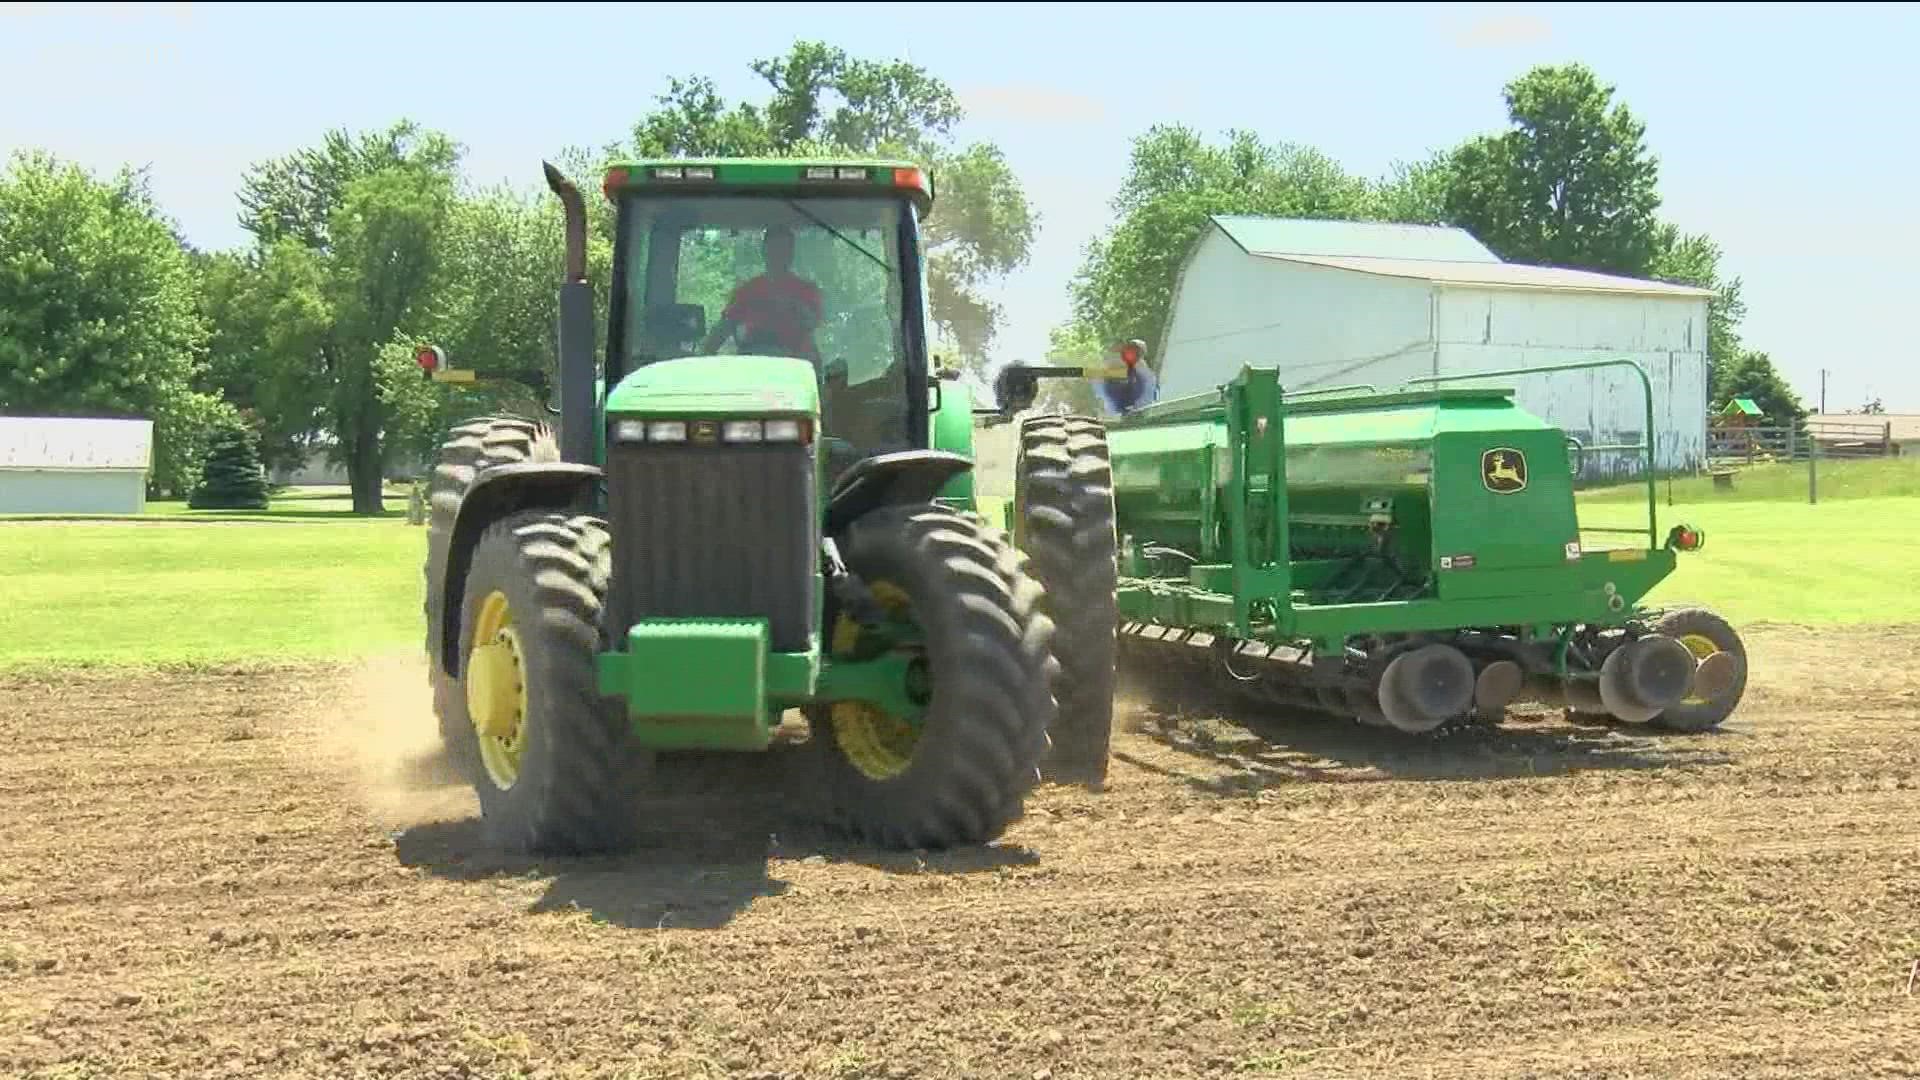 It's something they're becoming used to: rain delays. Like many others, two farmers in northwest Ohio and southeast Michigan know it all too well.